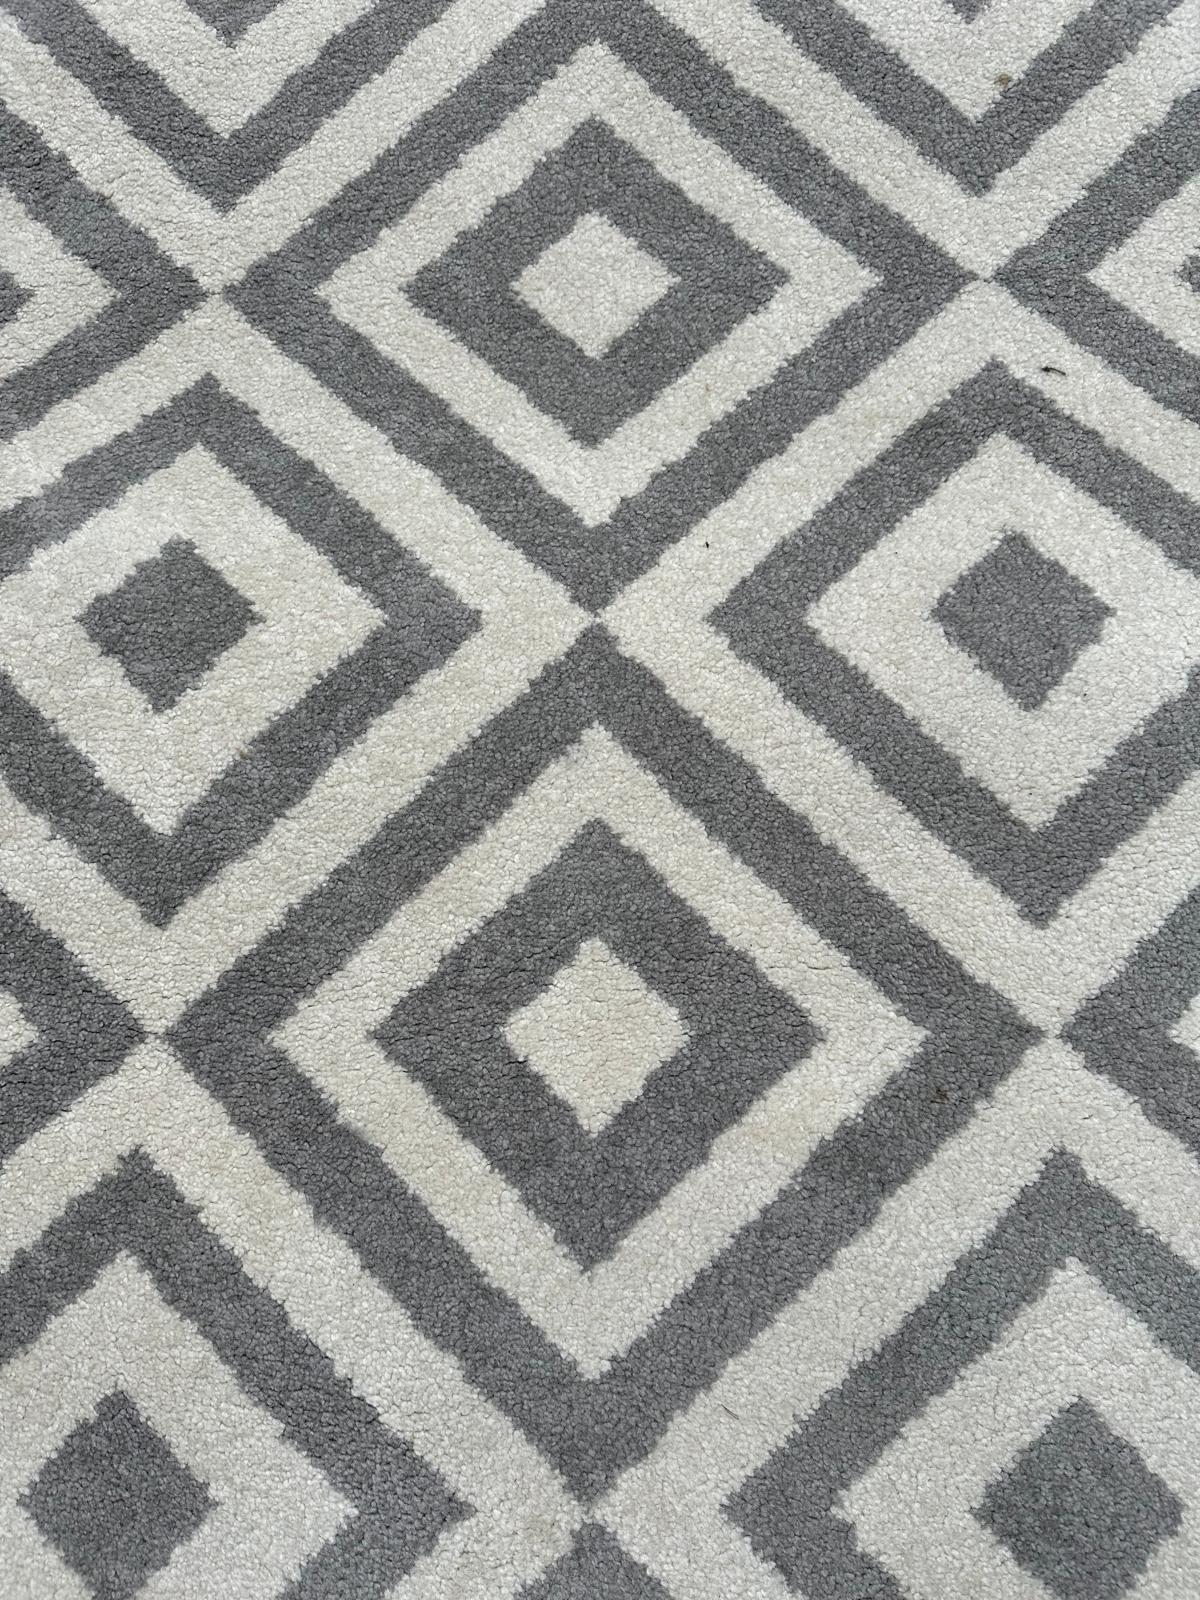 A contemporary rug in a grey and white geometric pattern 160cm x 220cm - Image 2 of 4